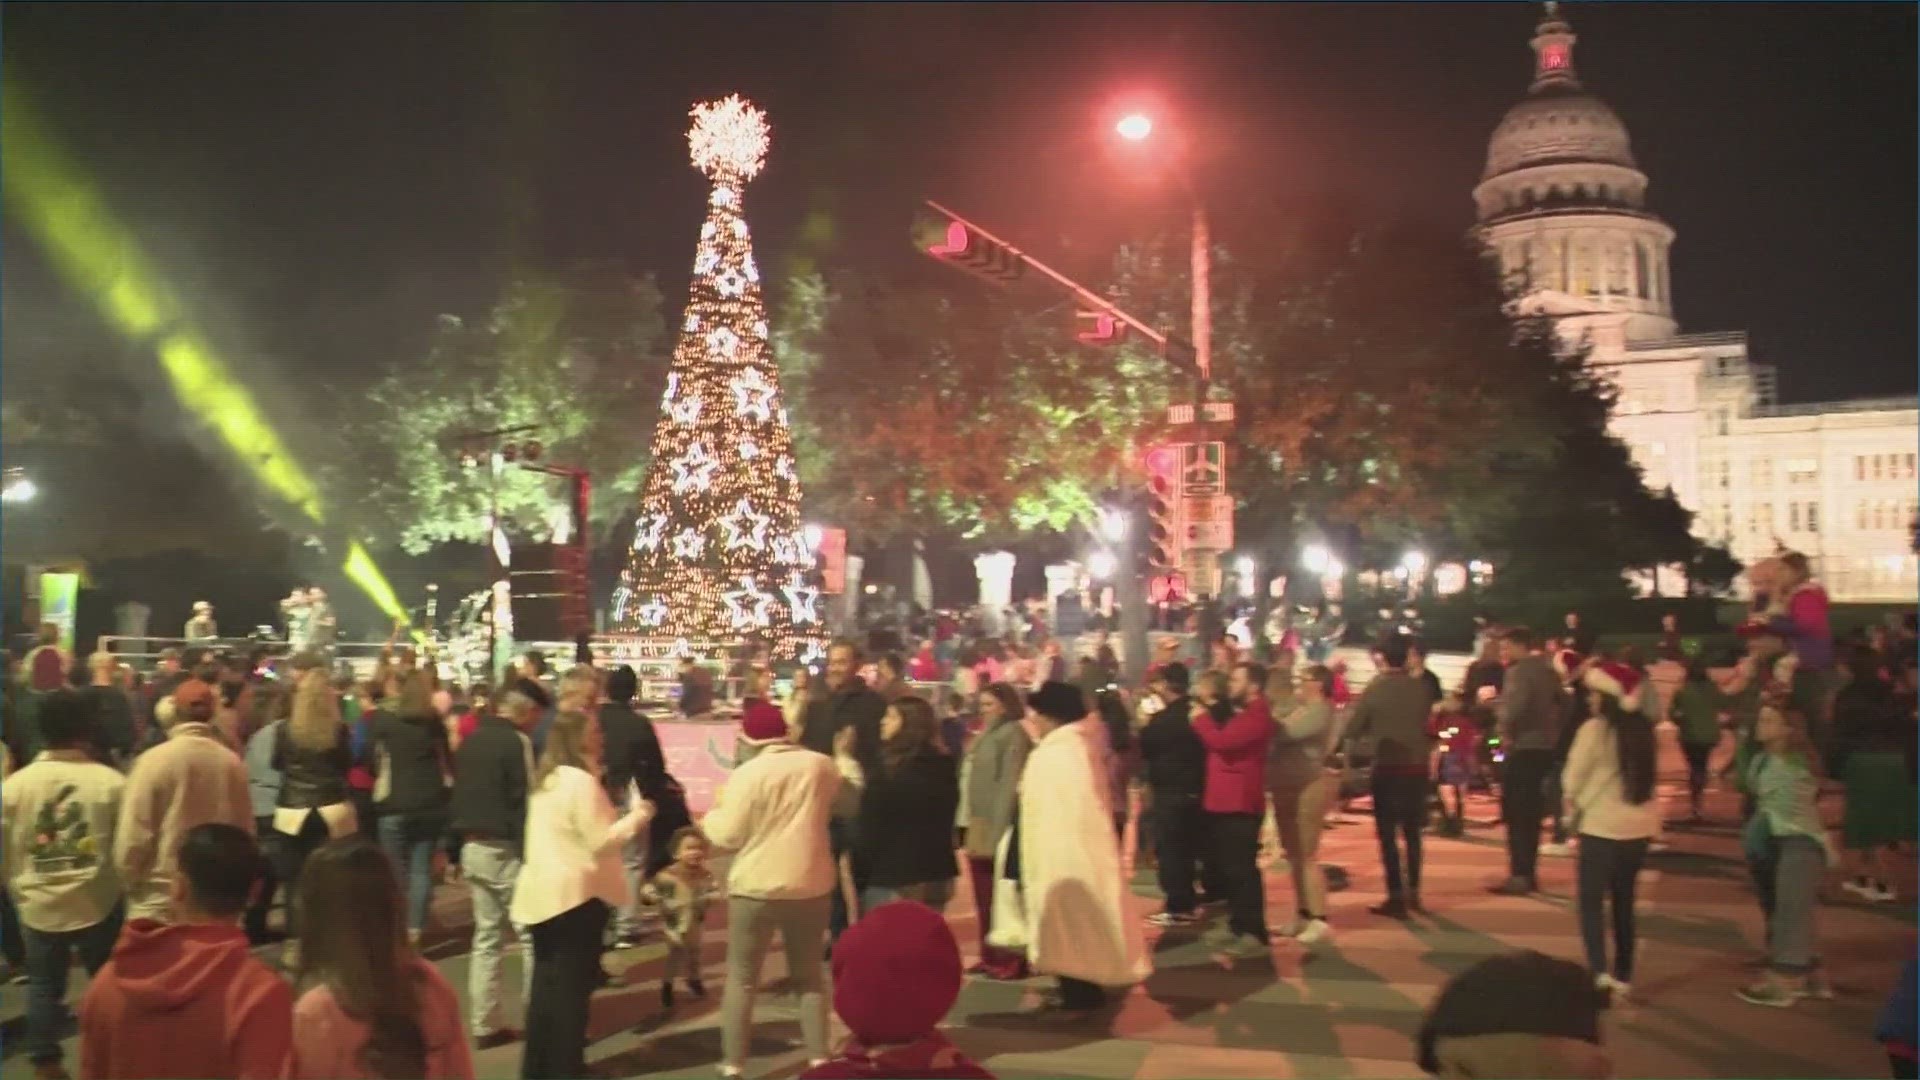 In Austin, the holiday tree at the Texas Capitol was officially lit on Saturday night, Dec. 1. The Downtown Austin Alliance held a holiday sing-a-long and stroll.